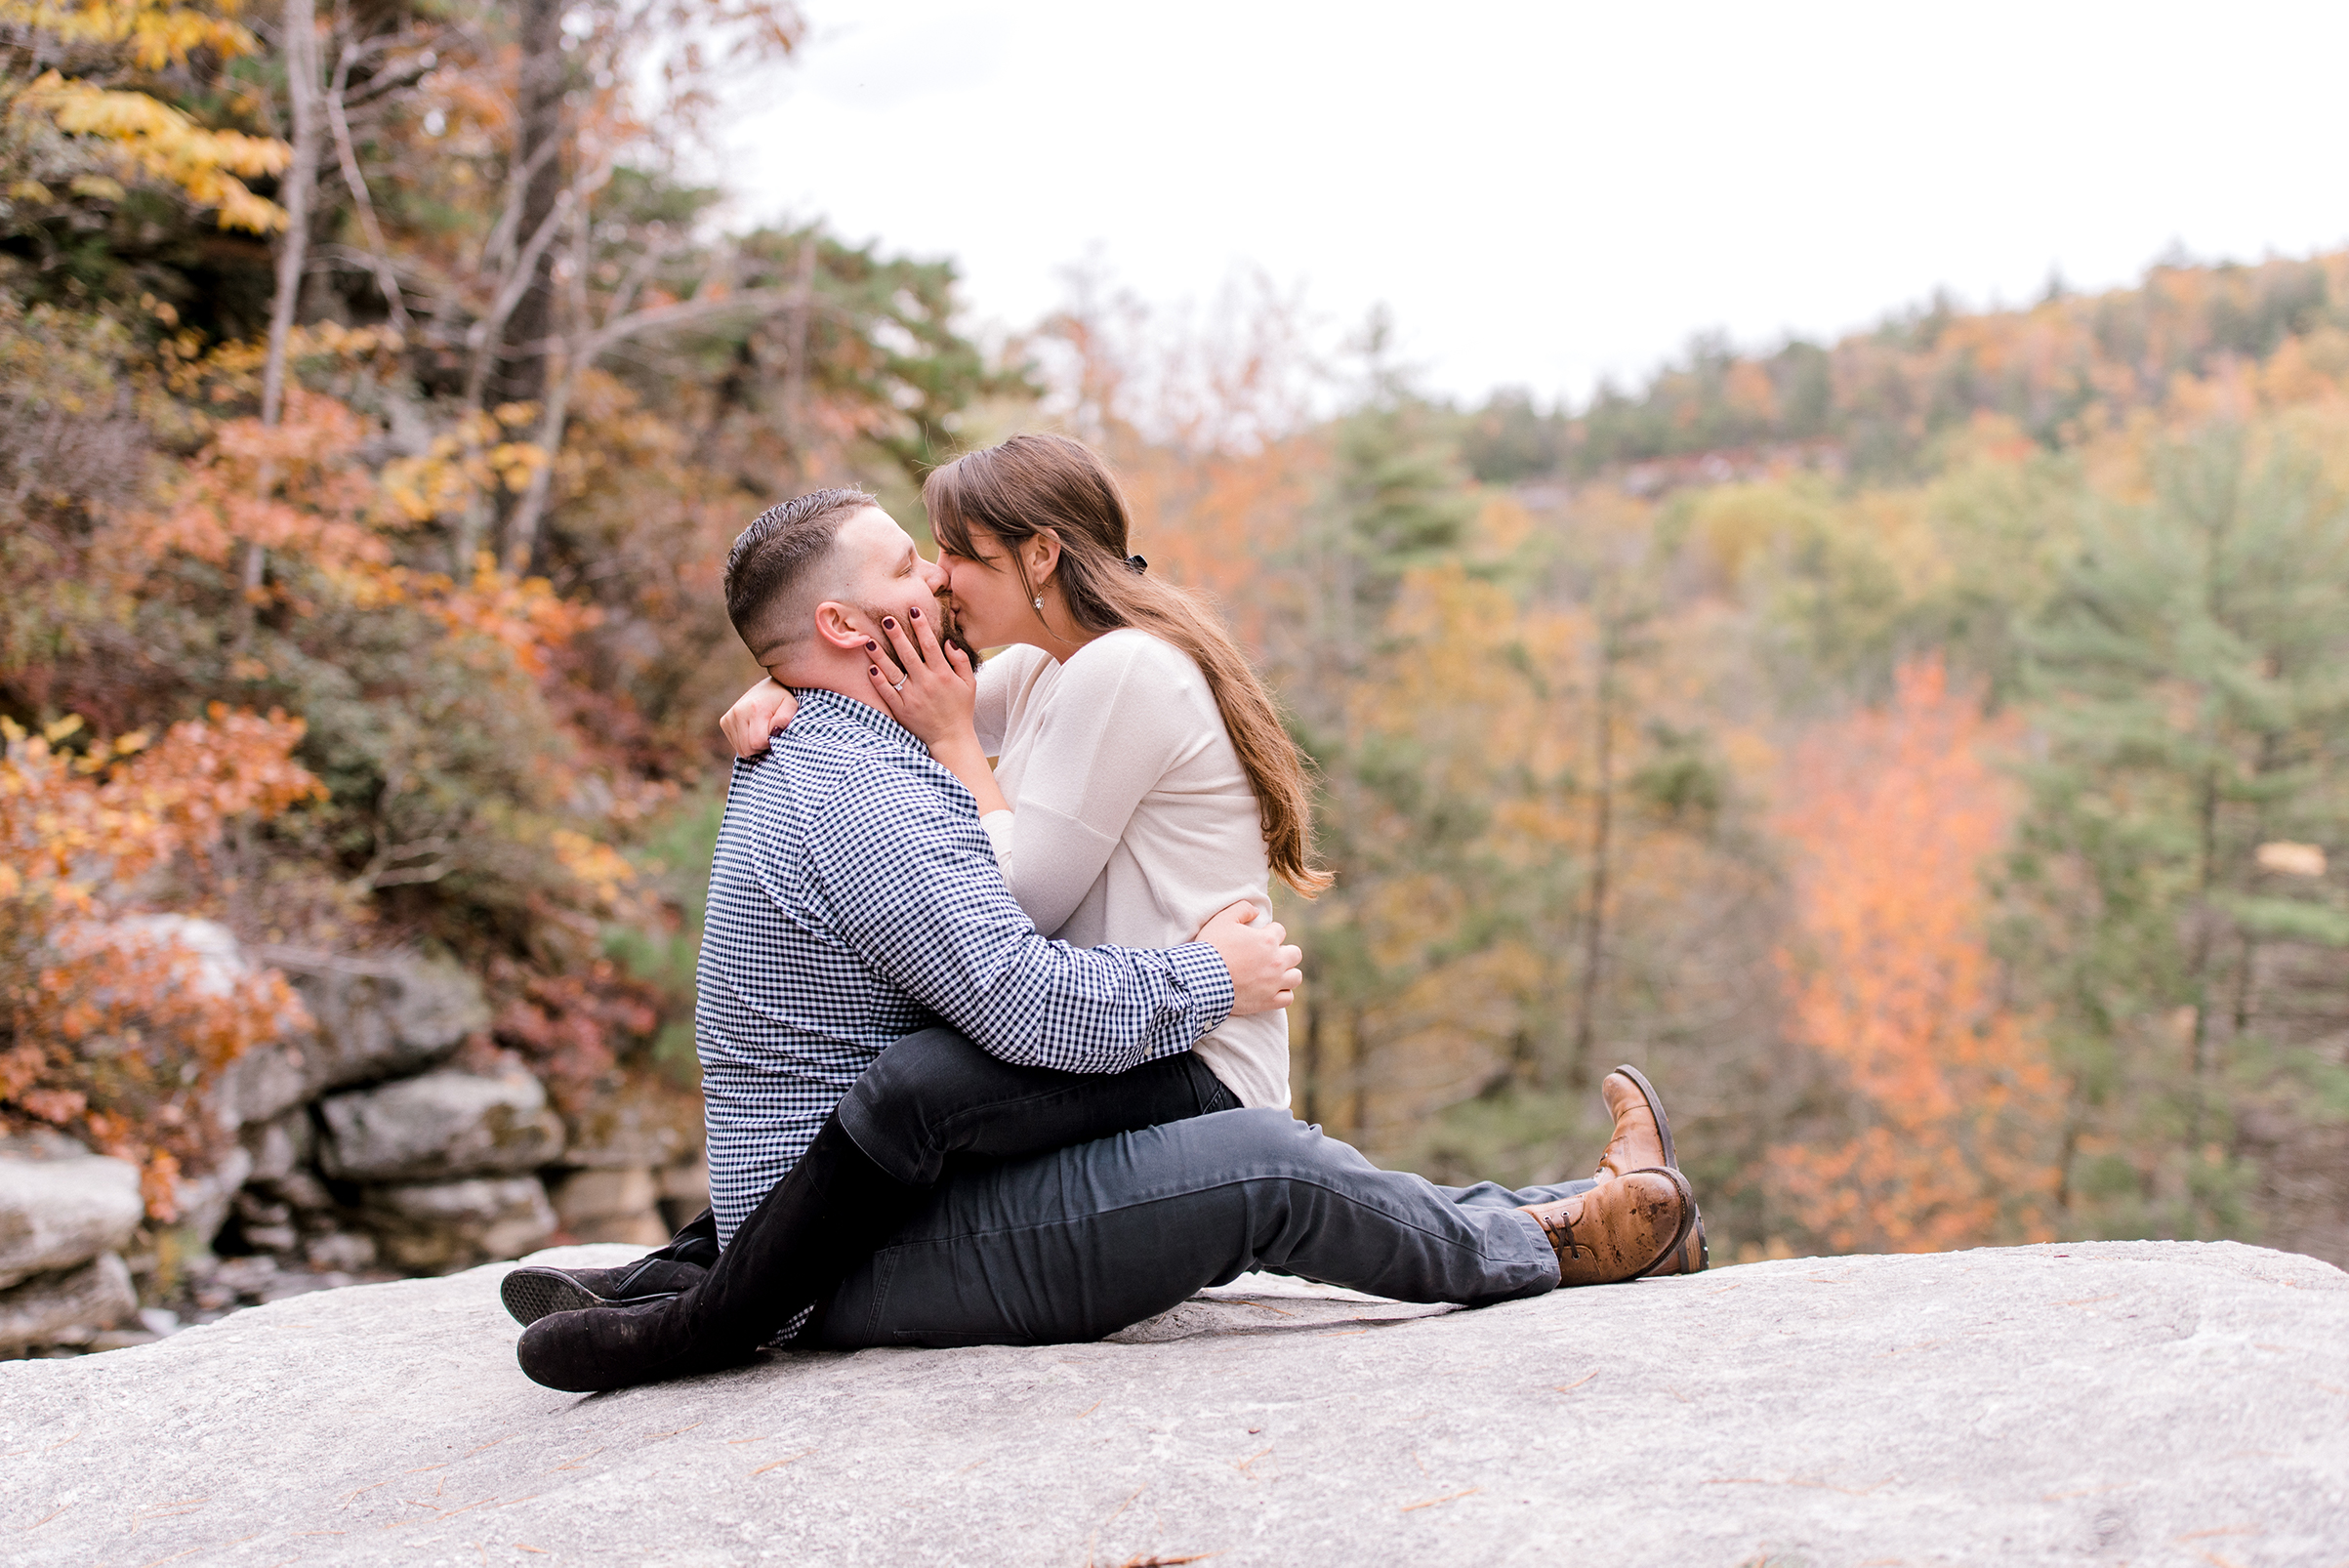 lake minnewaska, hudson valley, new york, hudson valley wedding photographer, engagement pictures, session, hudson valley bride, connectictut, westchester, new jersey